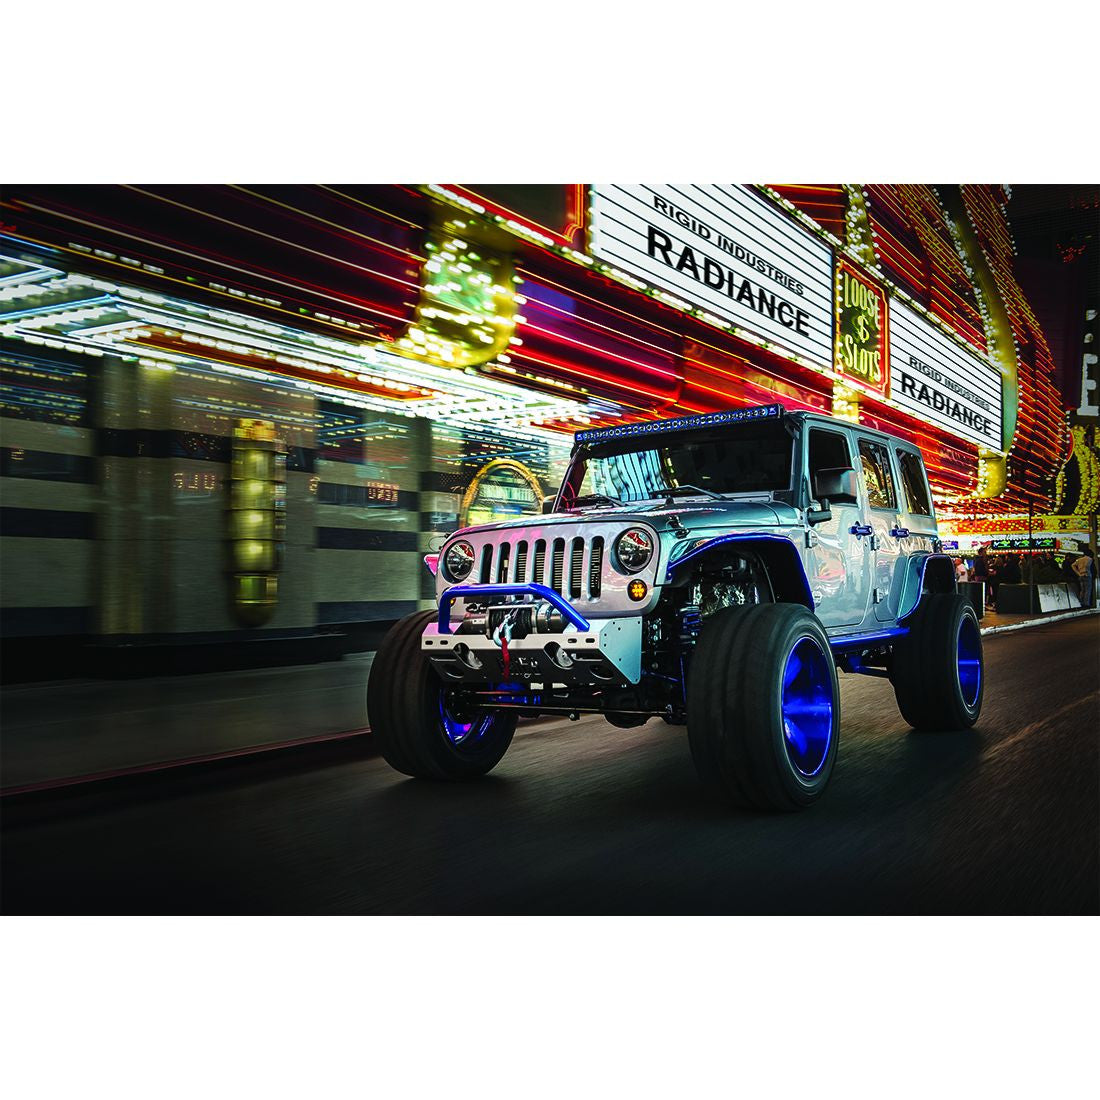 RIGID Industries Radiance Plus LED Light Bar, Broad-Spot Optic, 30 Inch With Blue Backlight